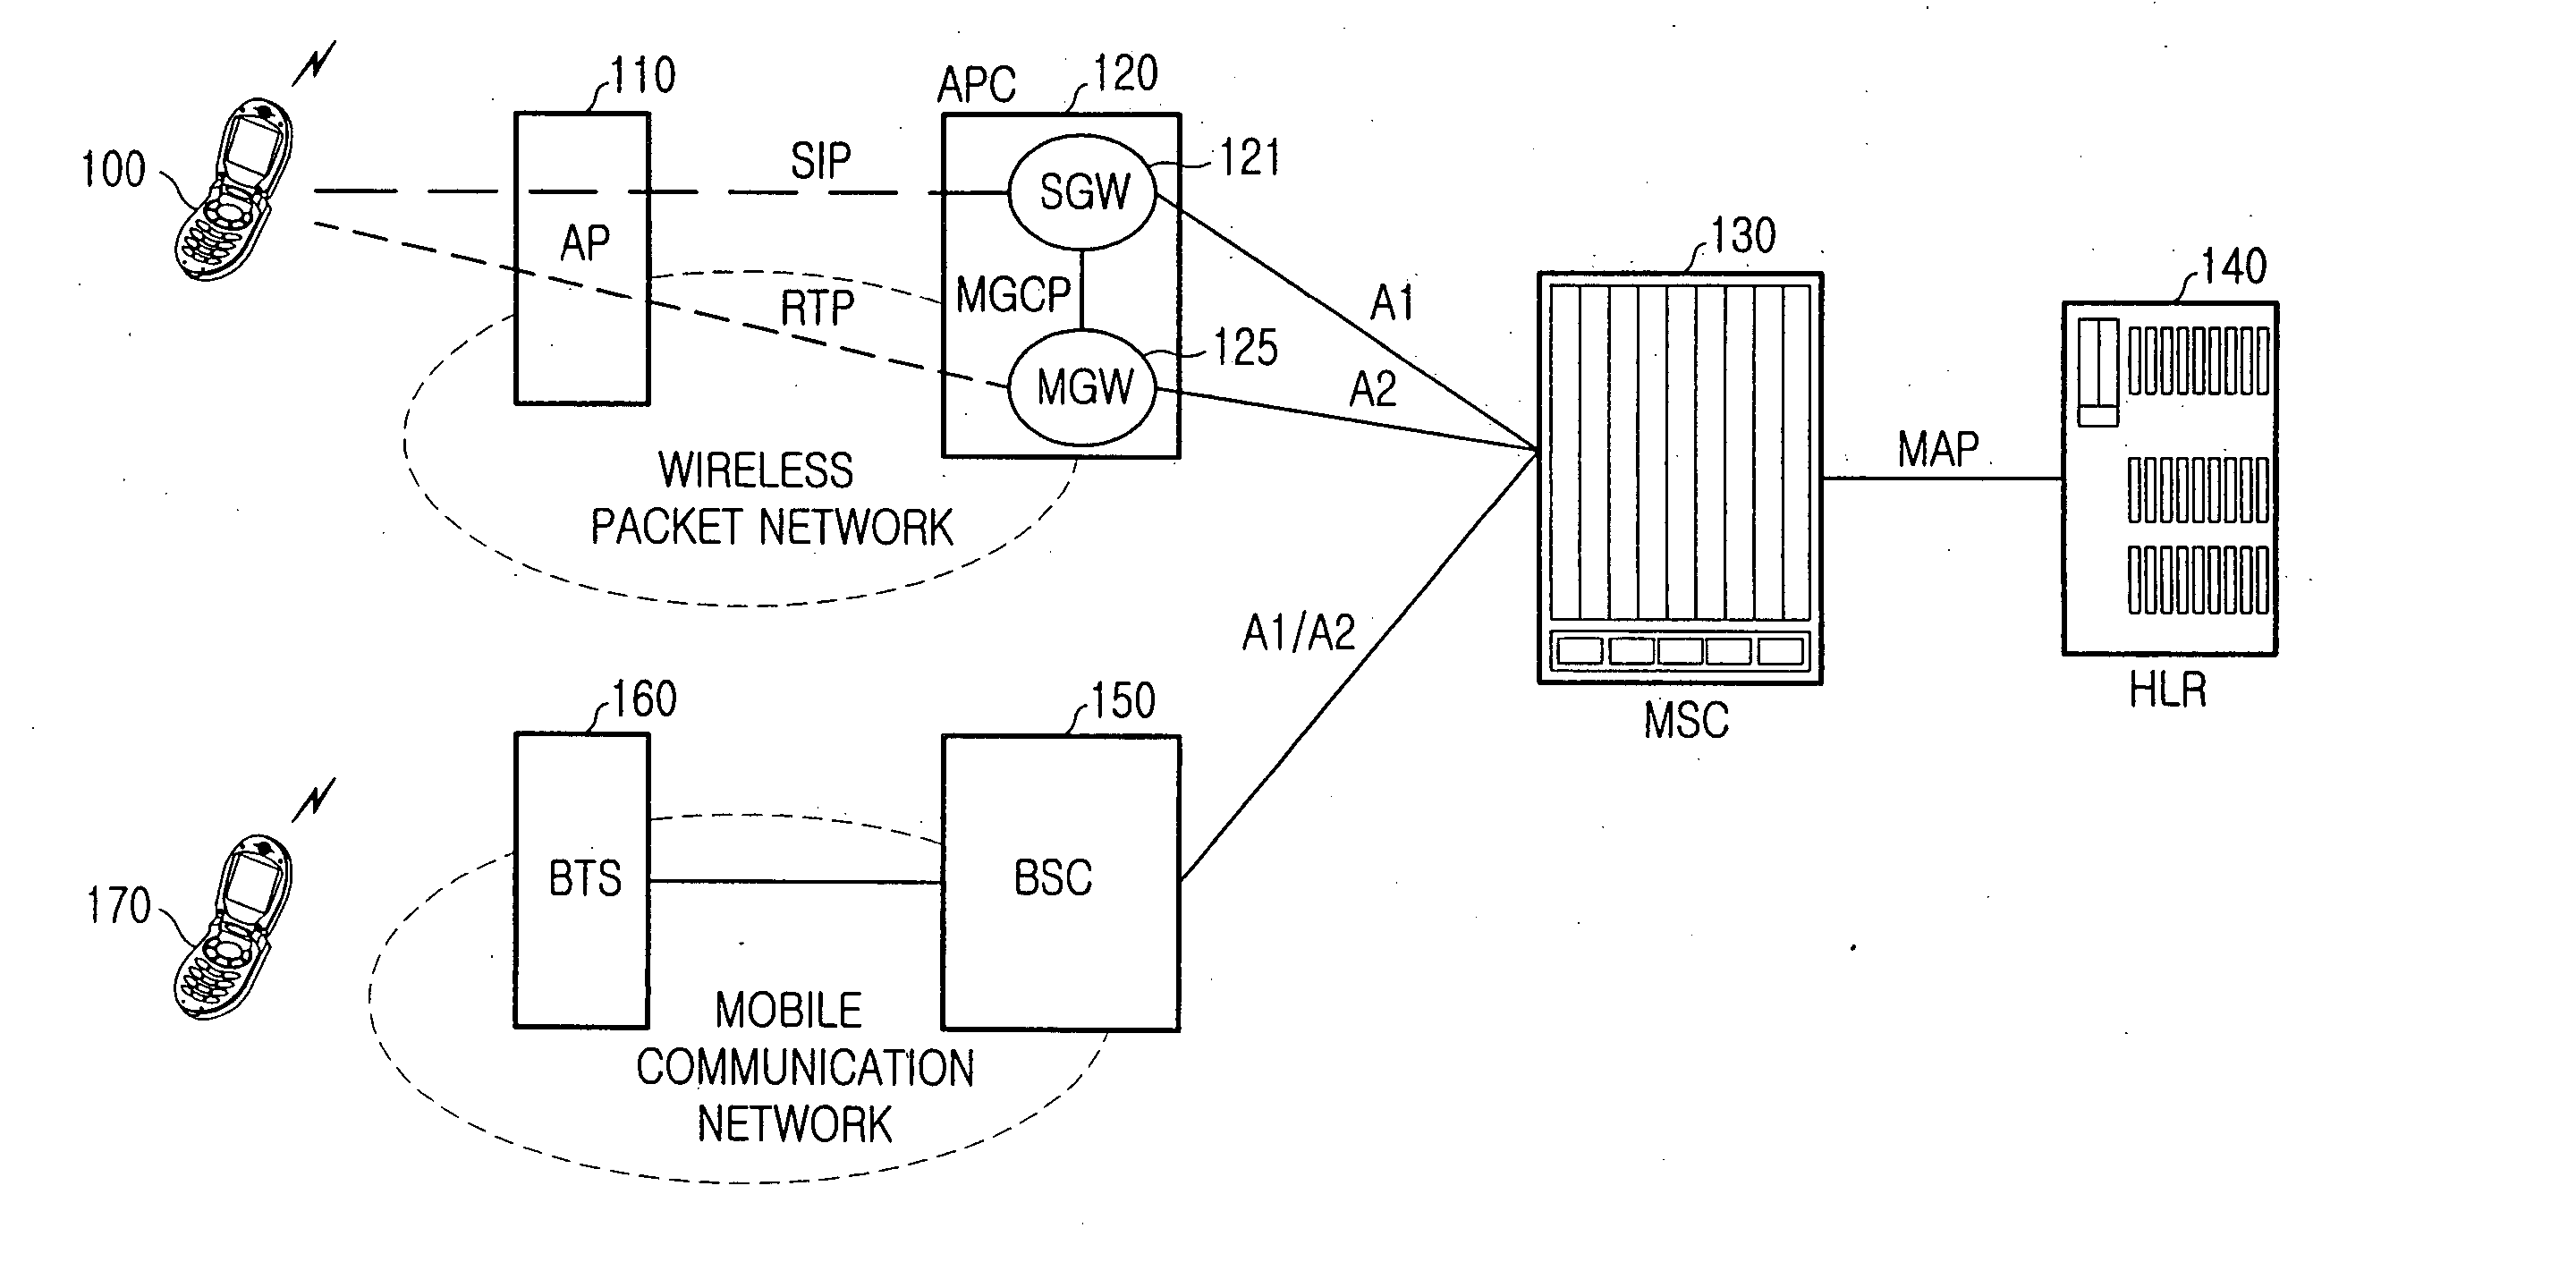 Network interworking system and method for providing seamless voice service and short message service between wireless communication networks